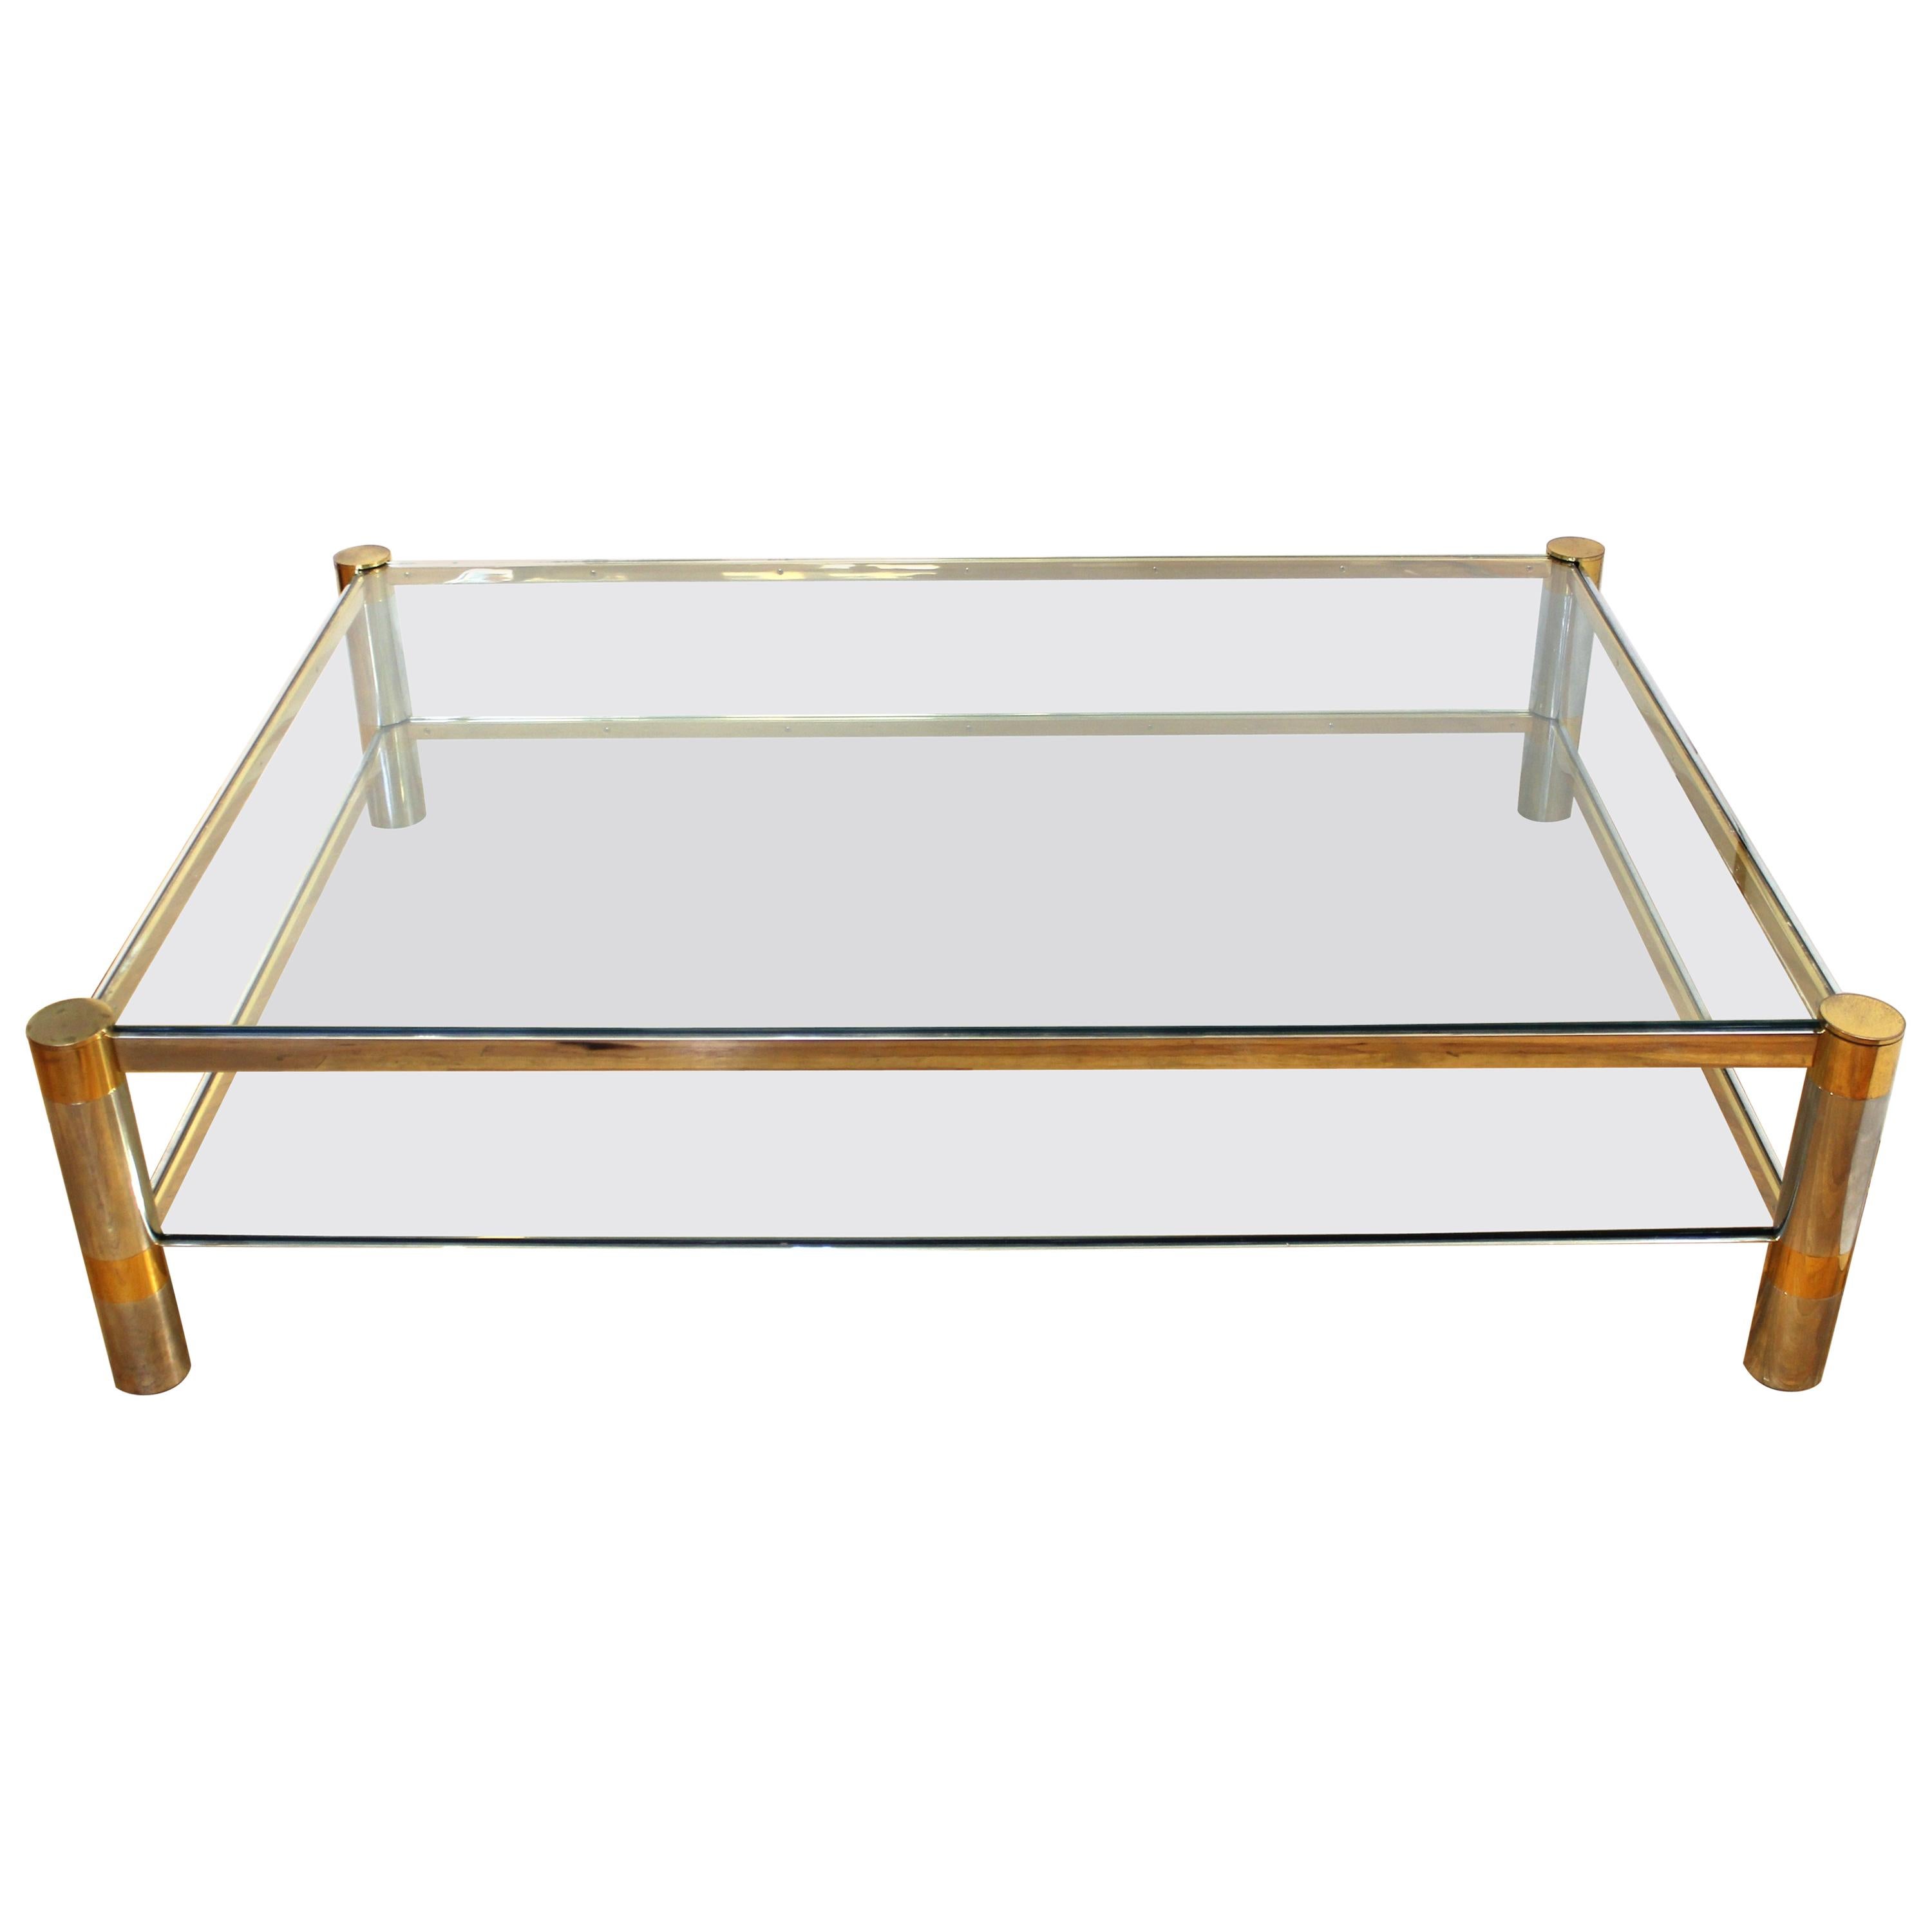 Karl Springer Modern Cocktail Table in Brass and Nickel with Glass Tiers